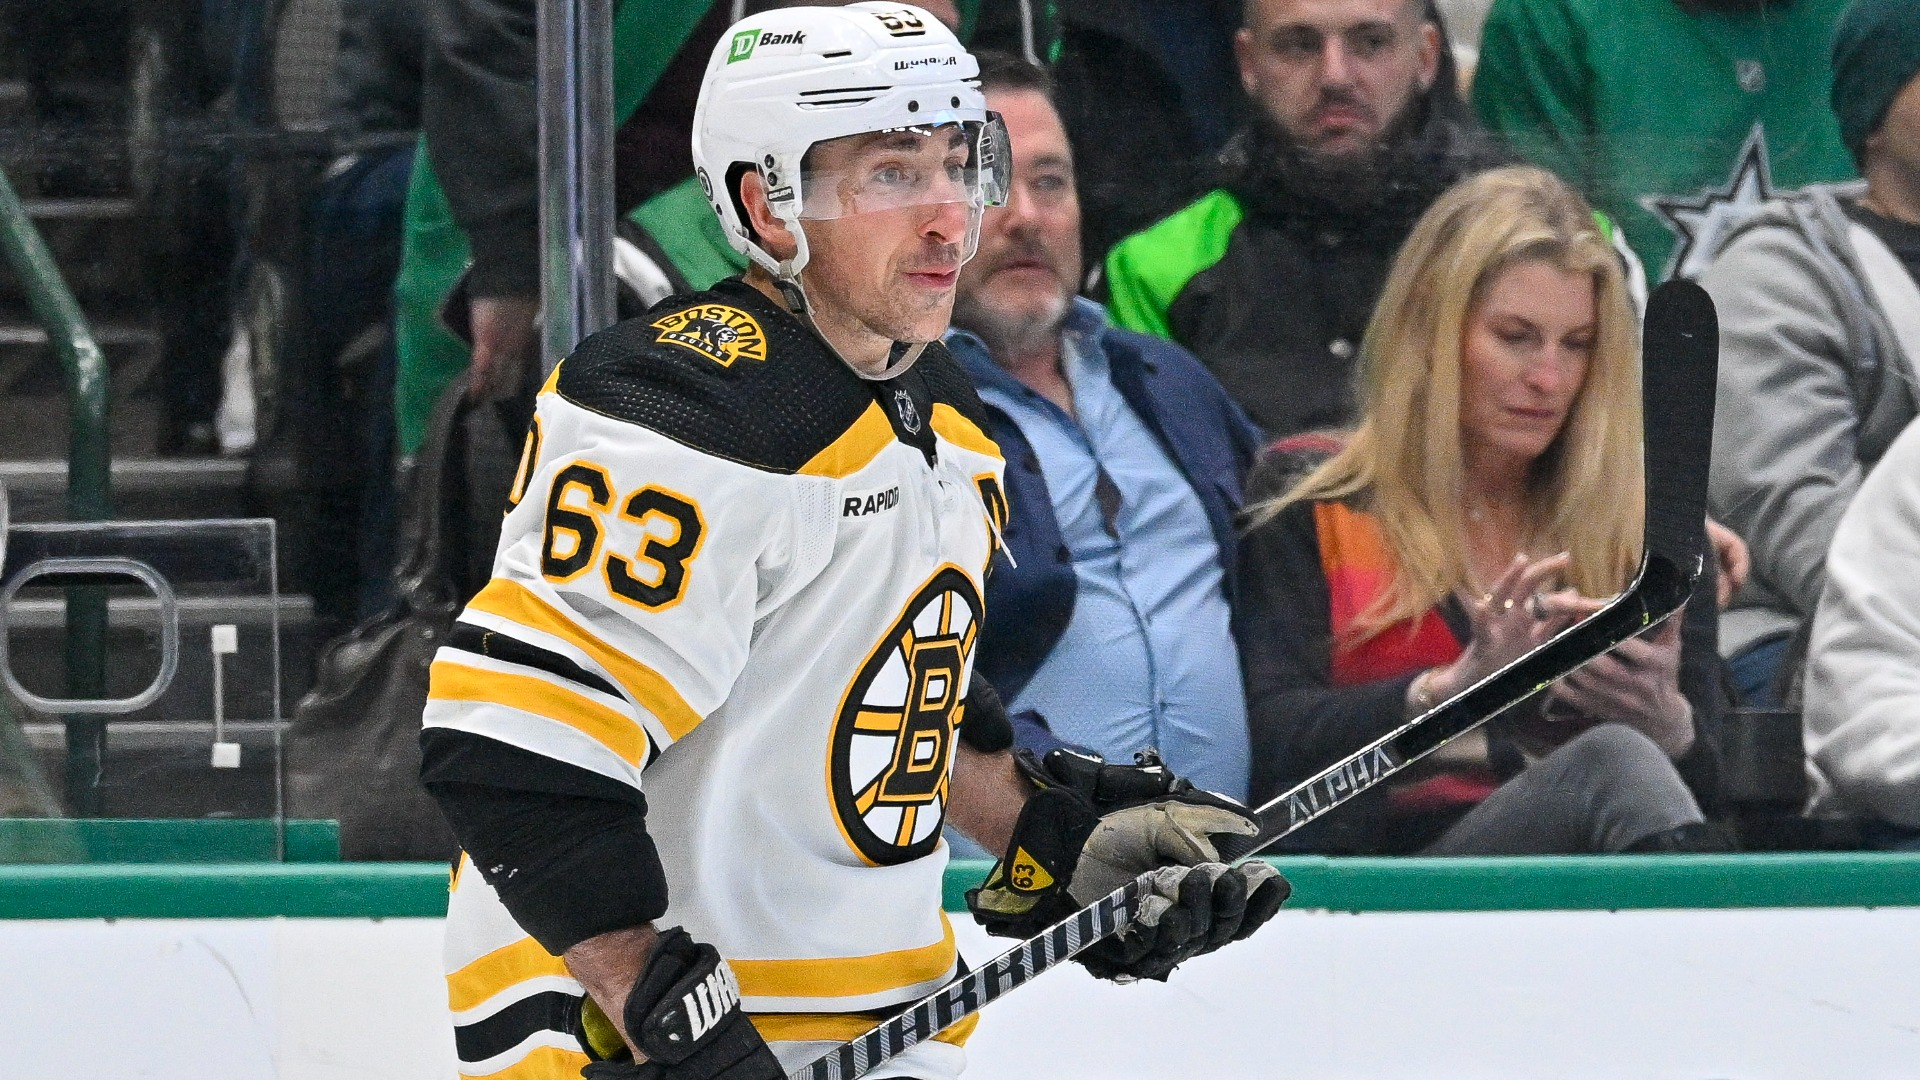 Brad Marchand Needed Stitches After Collision In Bruins-Oilers